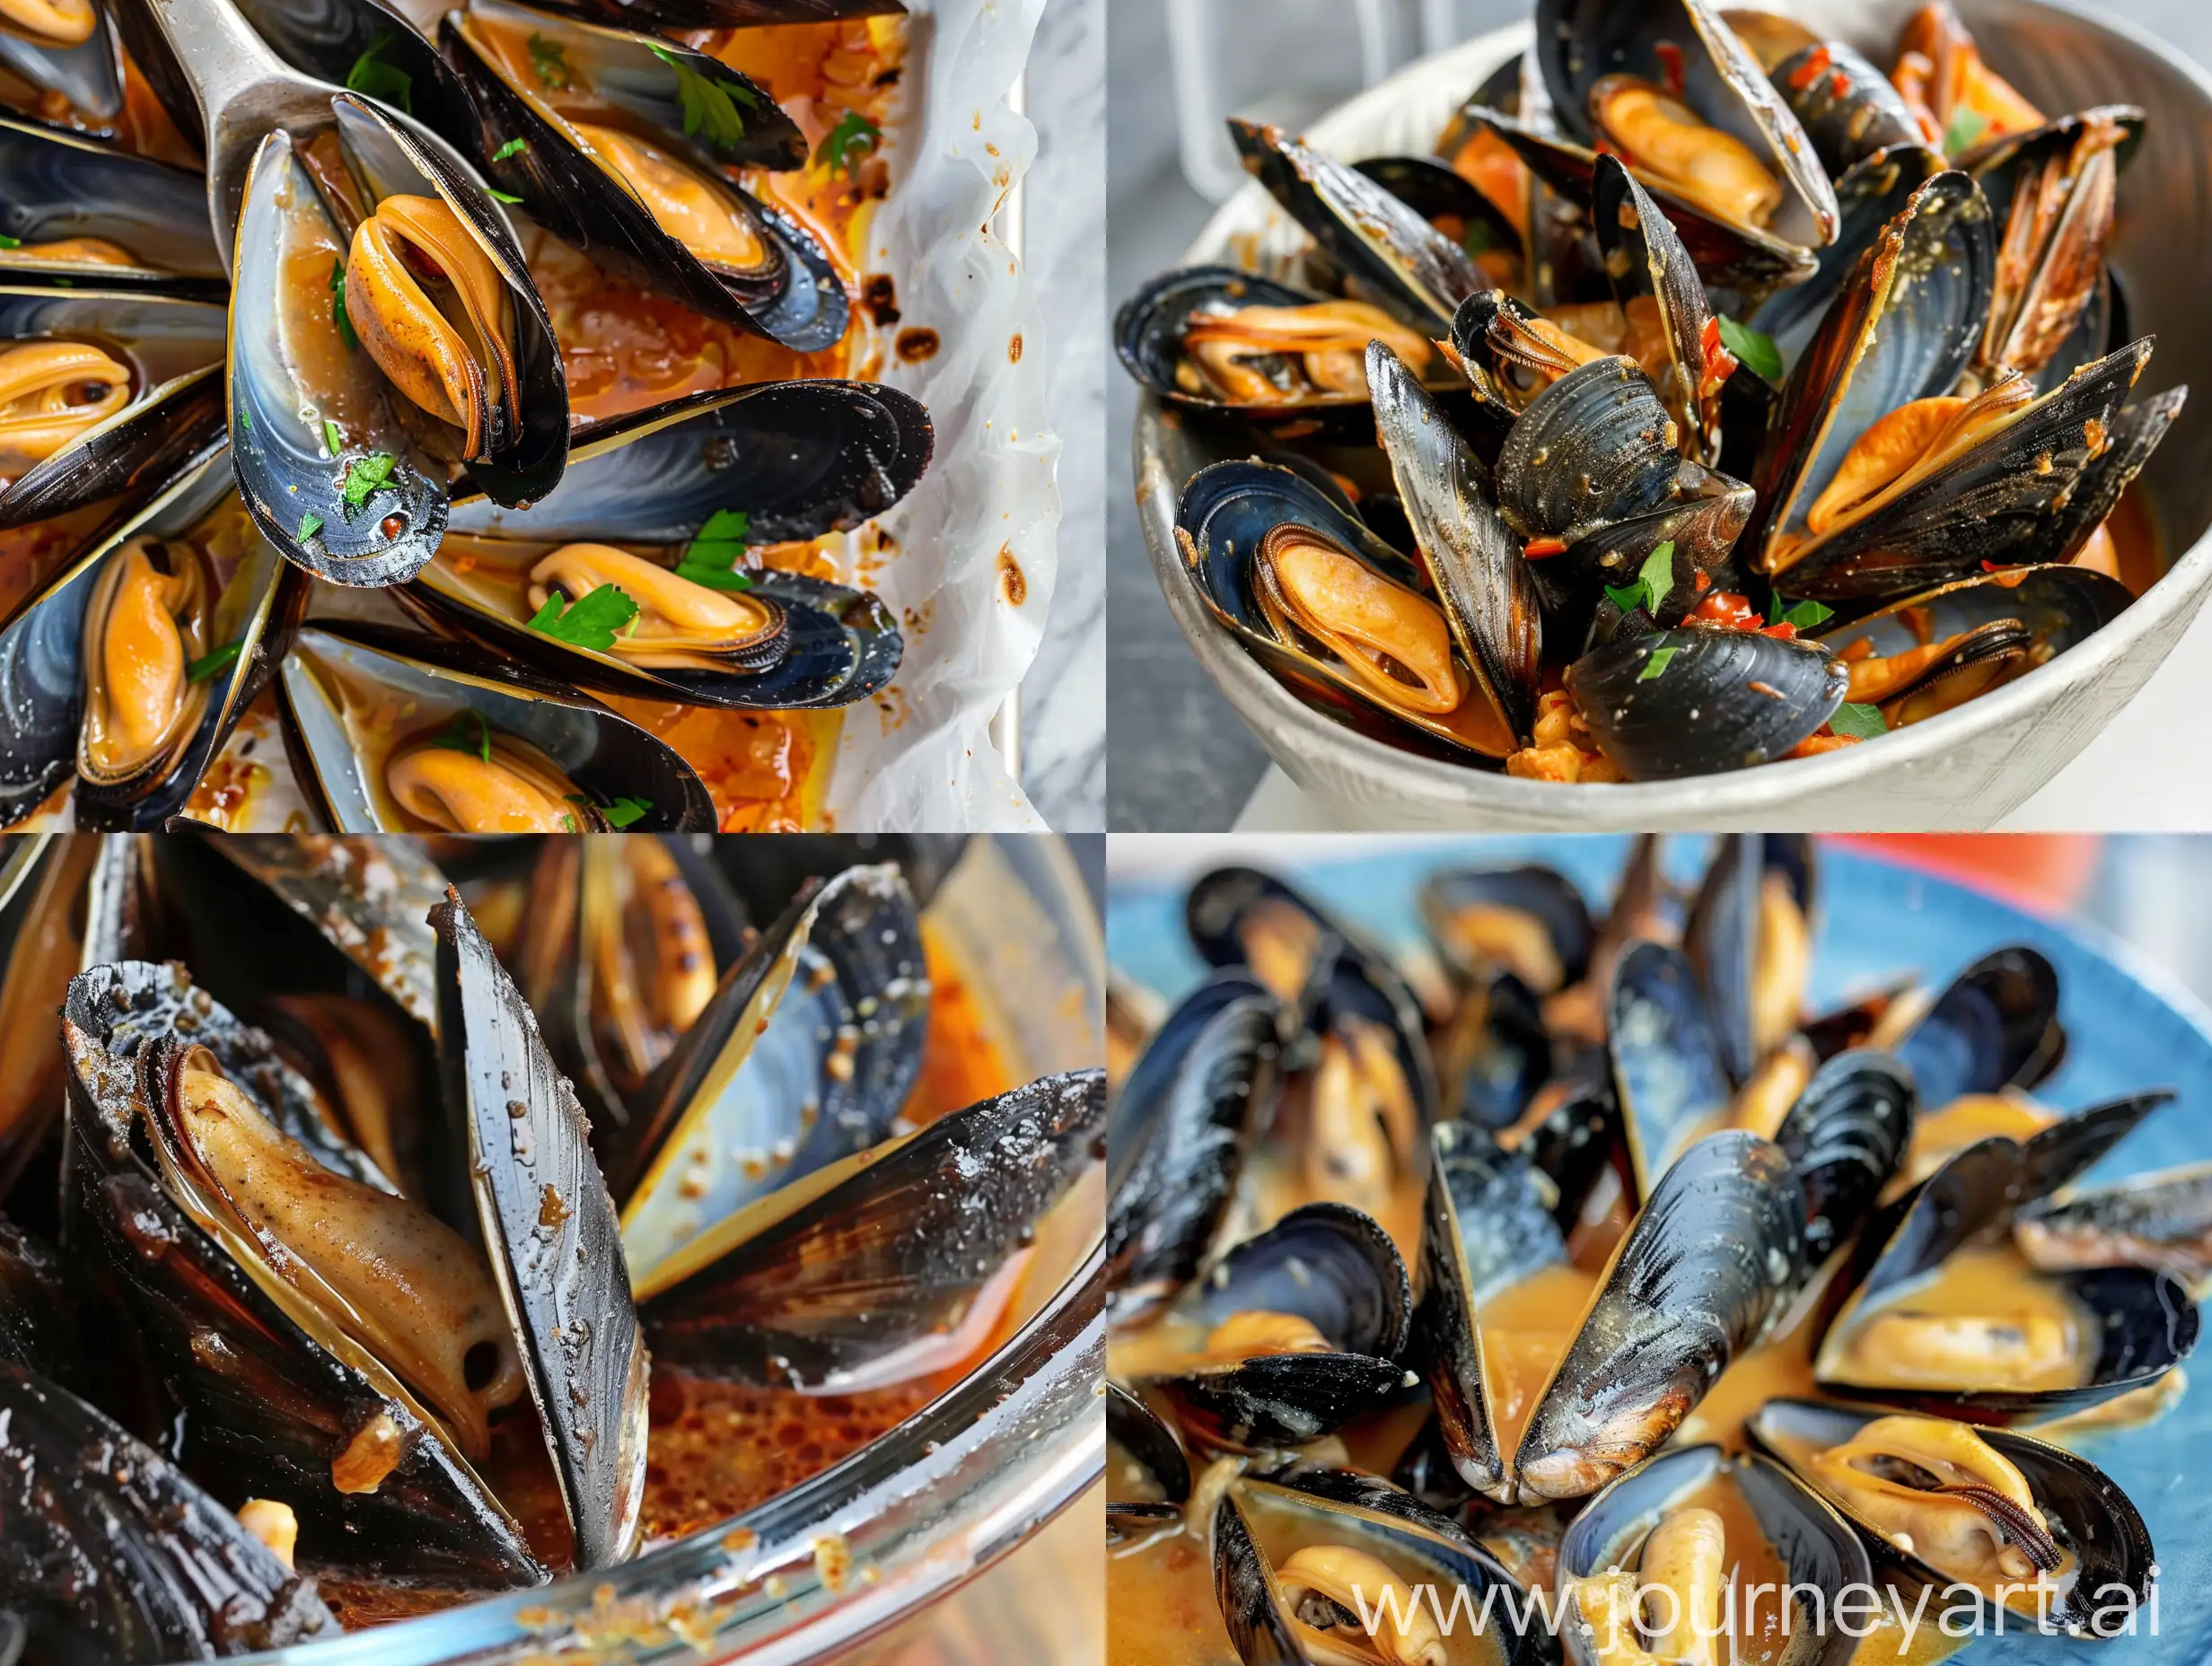 Gourmet-Baked-Mussels-in-Flavorful-Garlic-Butter-Sauce